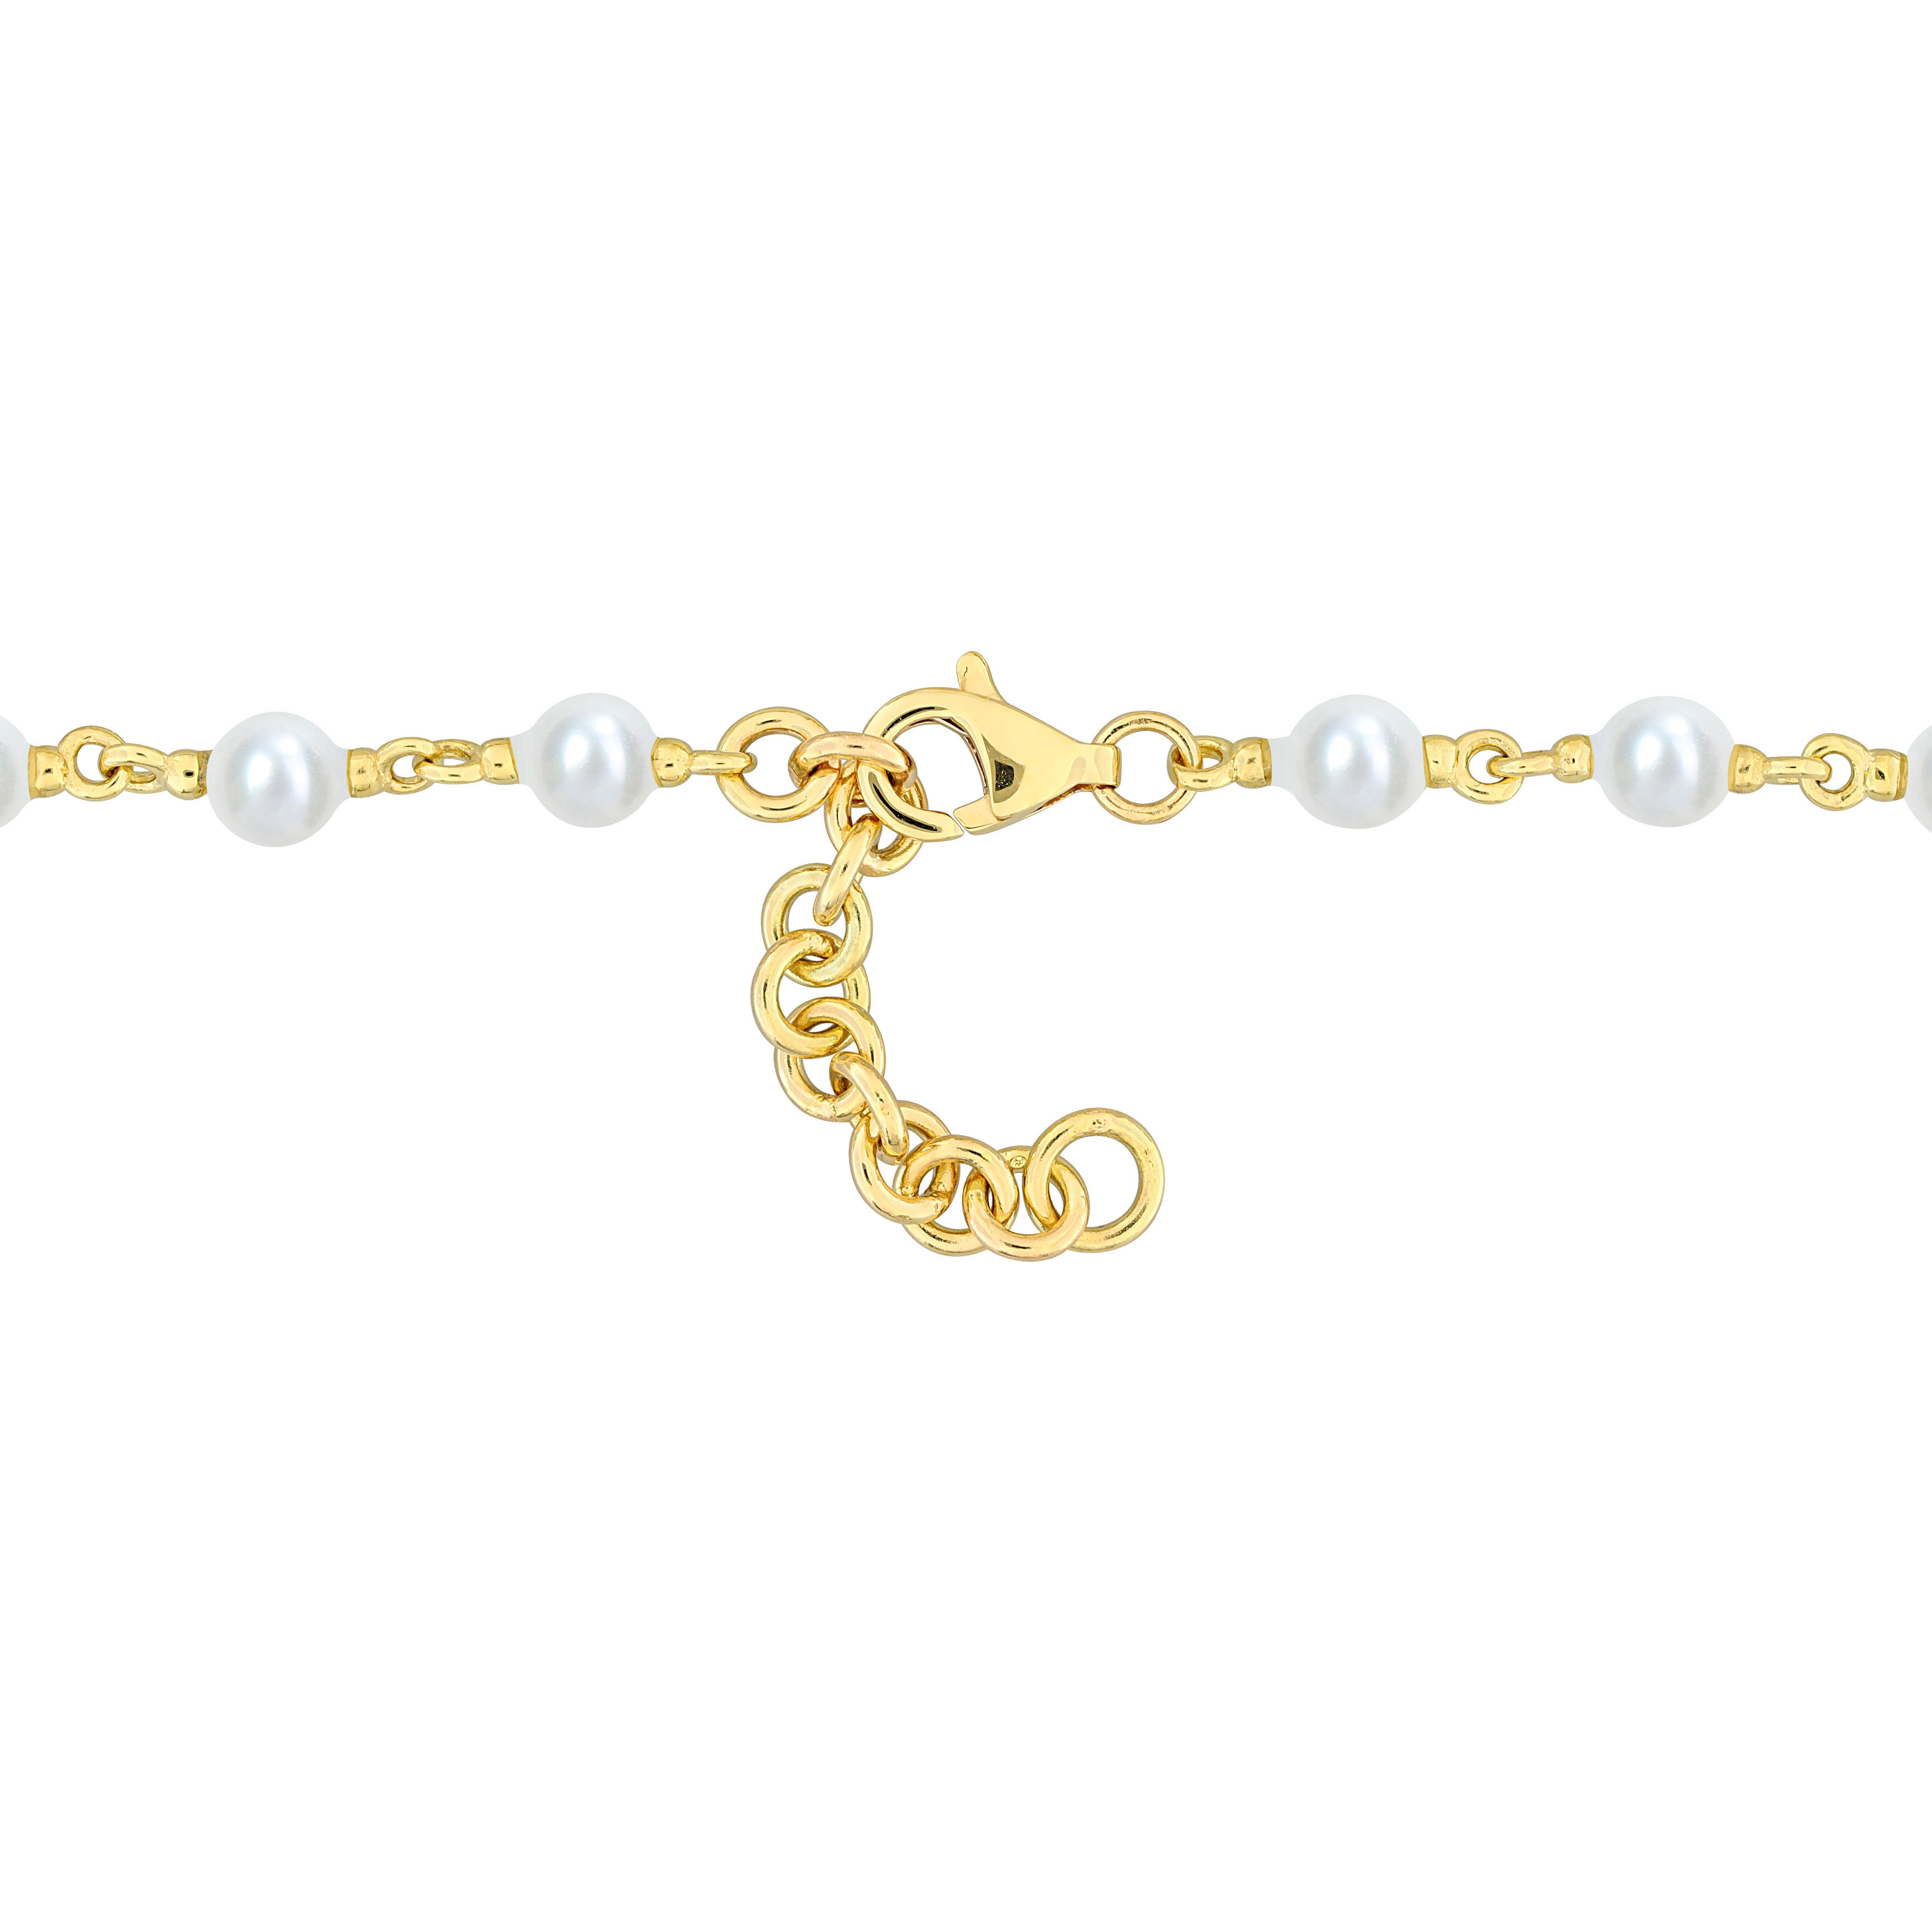 3.5-4mm Cultured Freshwater Pearl Station Bracelet in 10k Yellow Gold - 7.25 in.